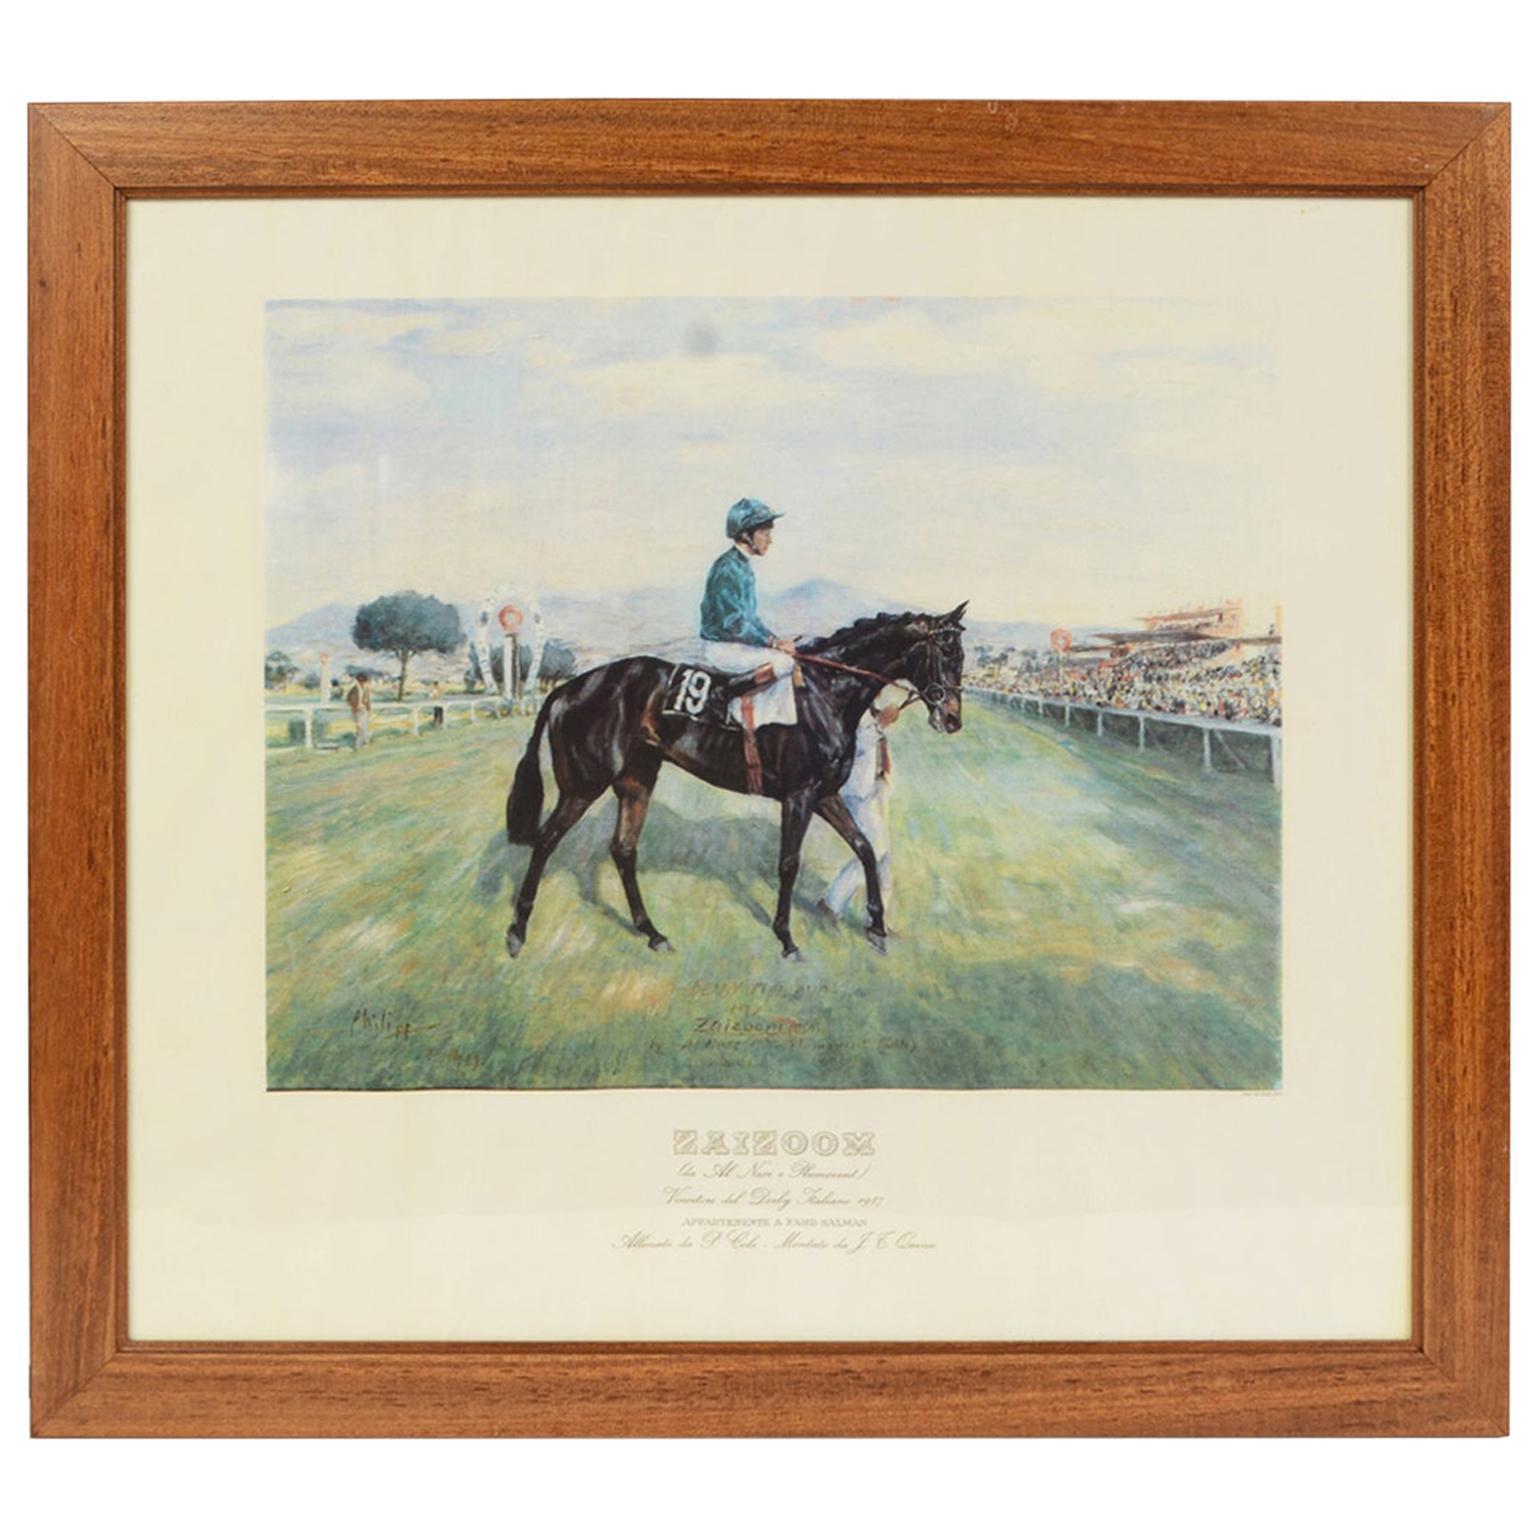 Lithograph Depicting the Horse Winner of the 1987 Italian Derby